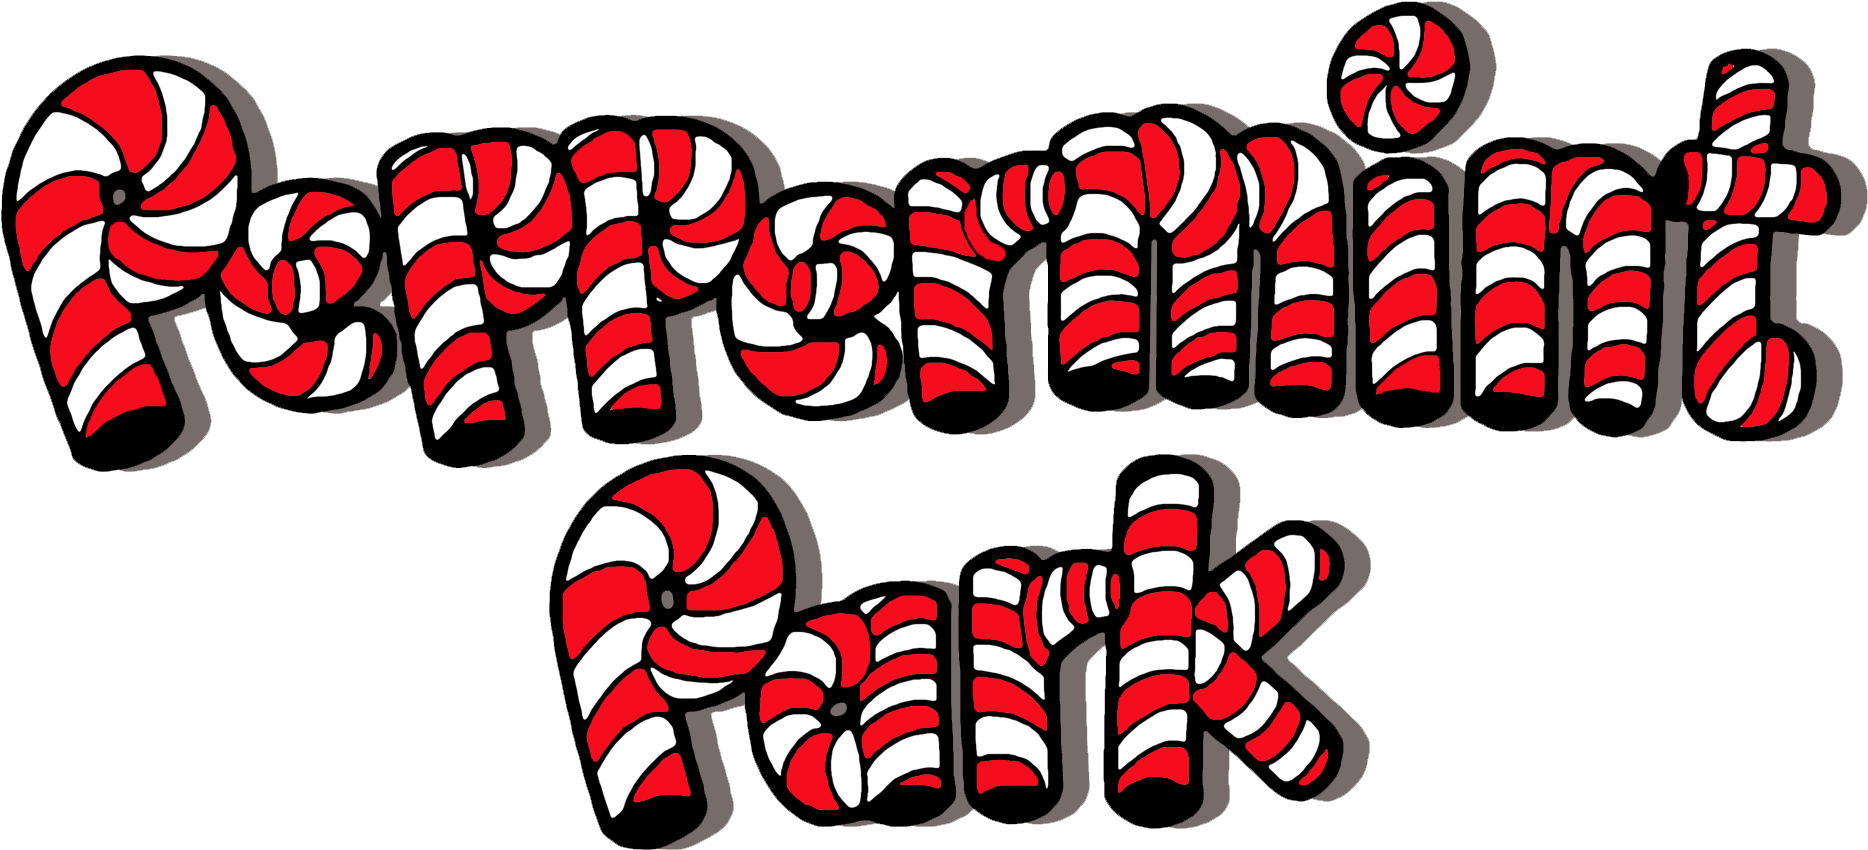 A Red And White Striped Letters